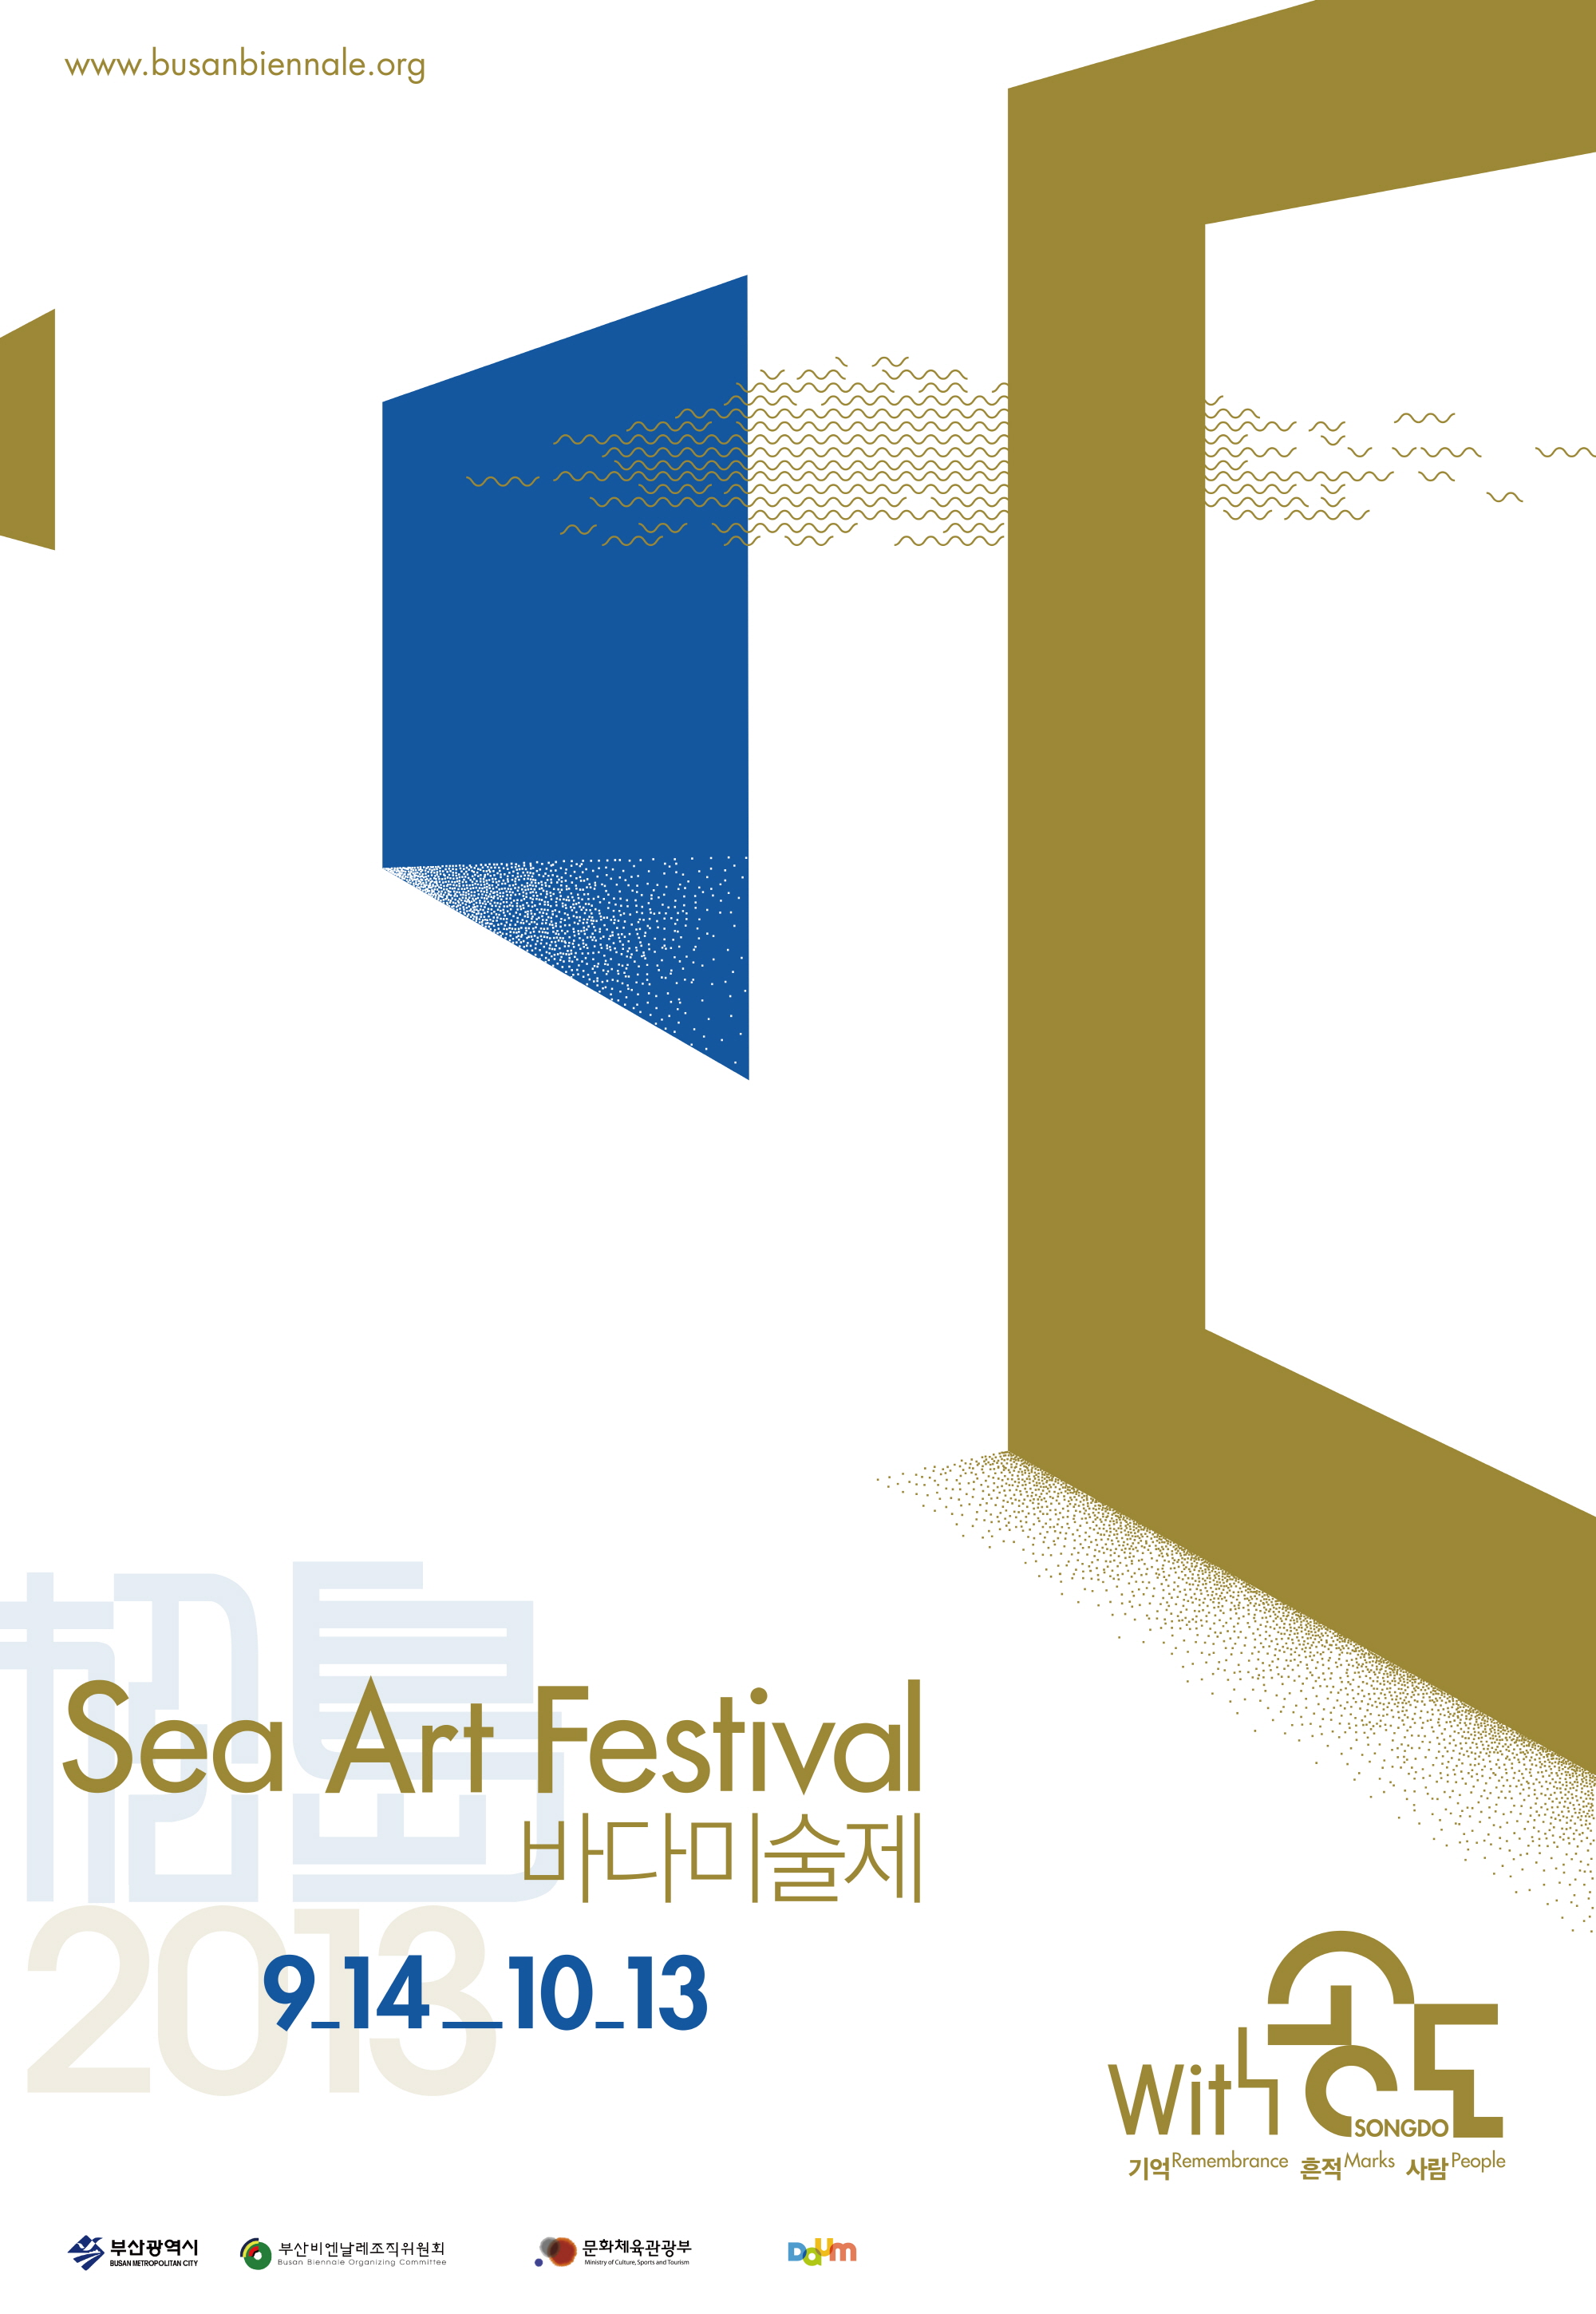 Poster sharing event for the Sea Art Festival 2013) Thumbnail image